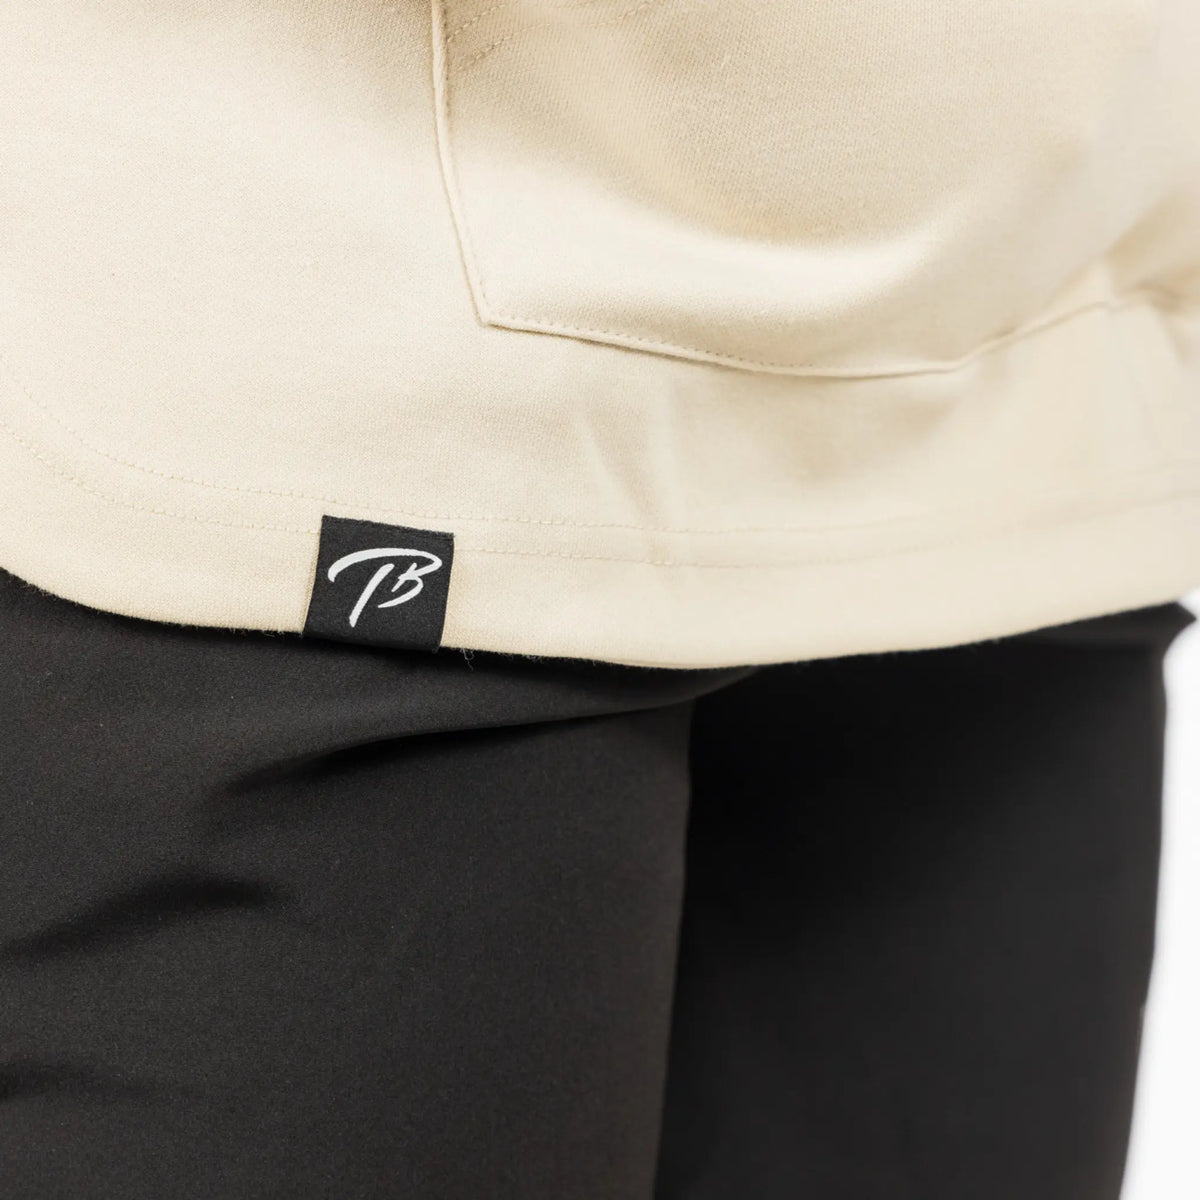 The image features a close-up view of a cream-colored hoodie with a small, square black logo label that has a white &quot;TB&quot; inscription, representing the brand identity. The hoodie fabric appears to be of a thick, durable quality suitable for athletic wear.